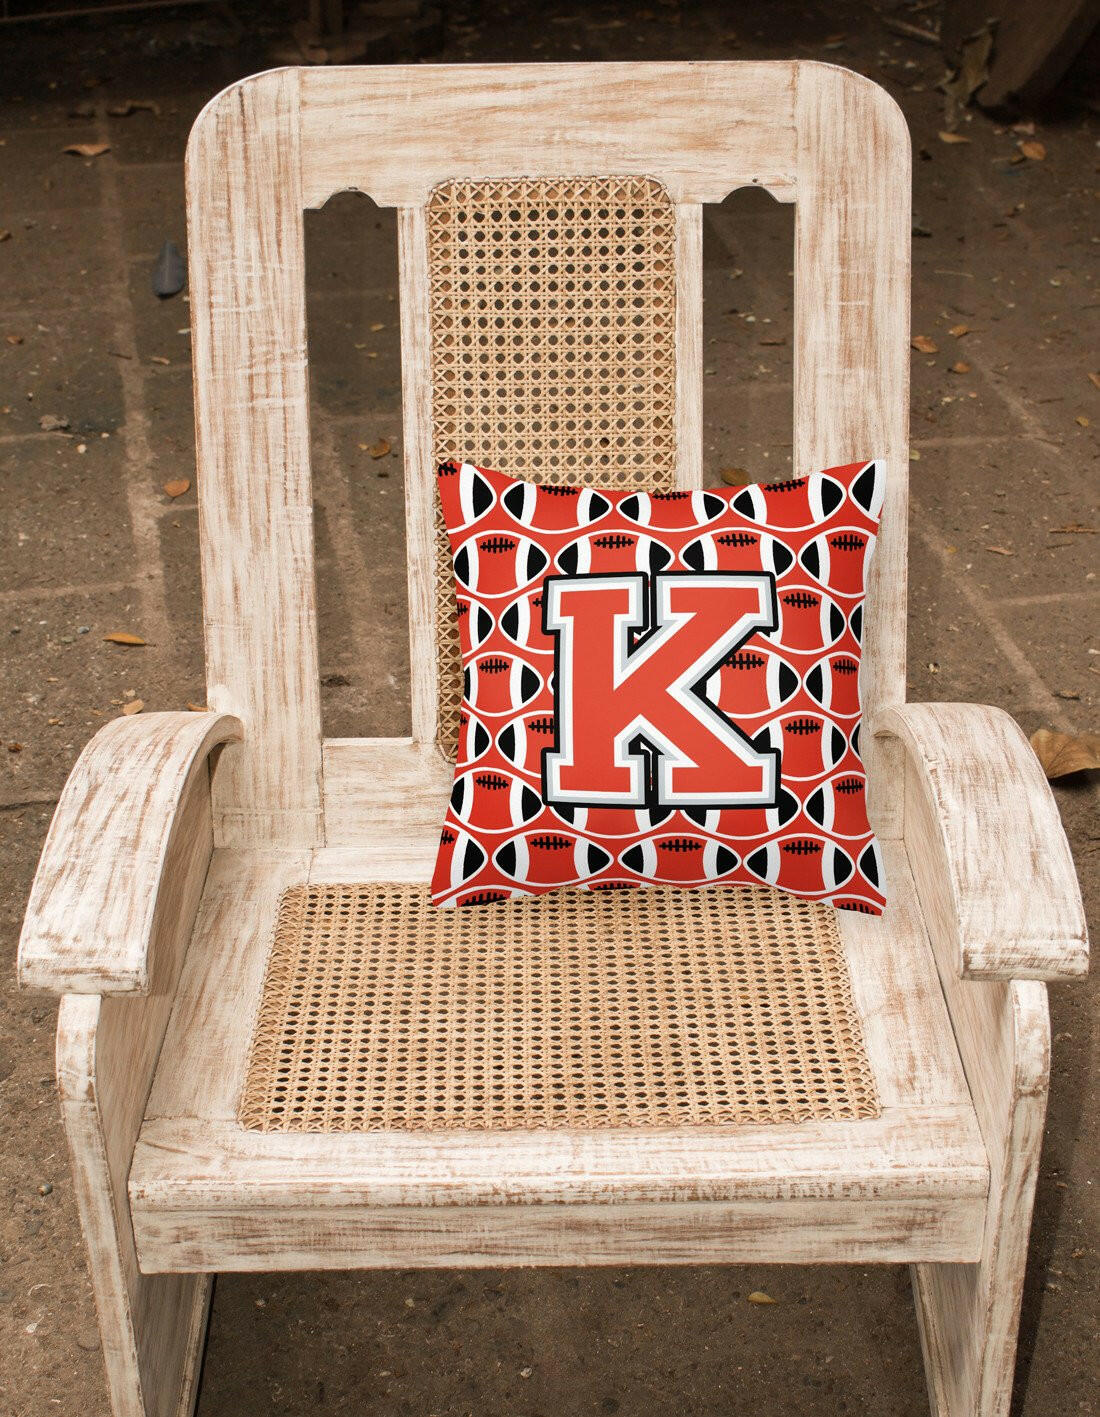 Letter K Football Scarlet and Grey Fabric Decorative Pillow CJ1067-KPW1414 by Caroline's Treasures